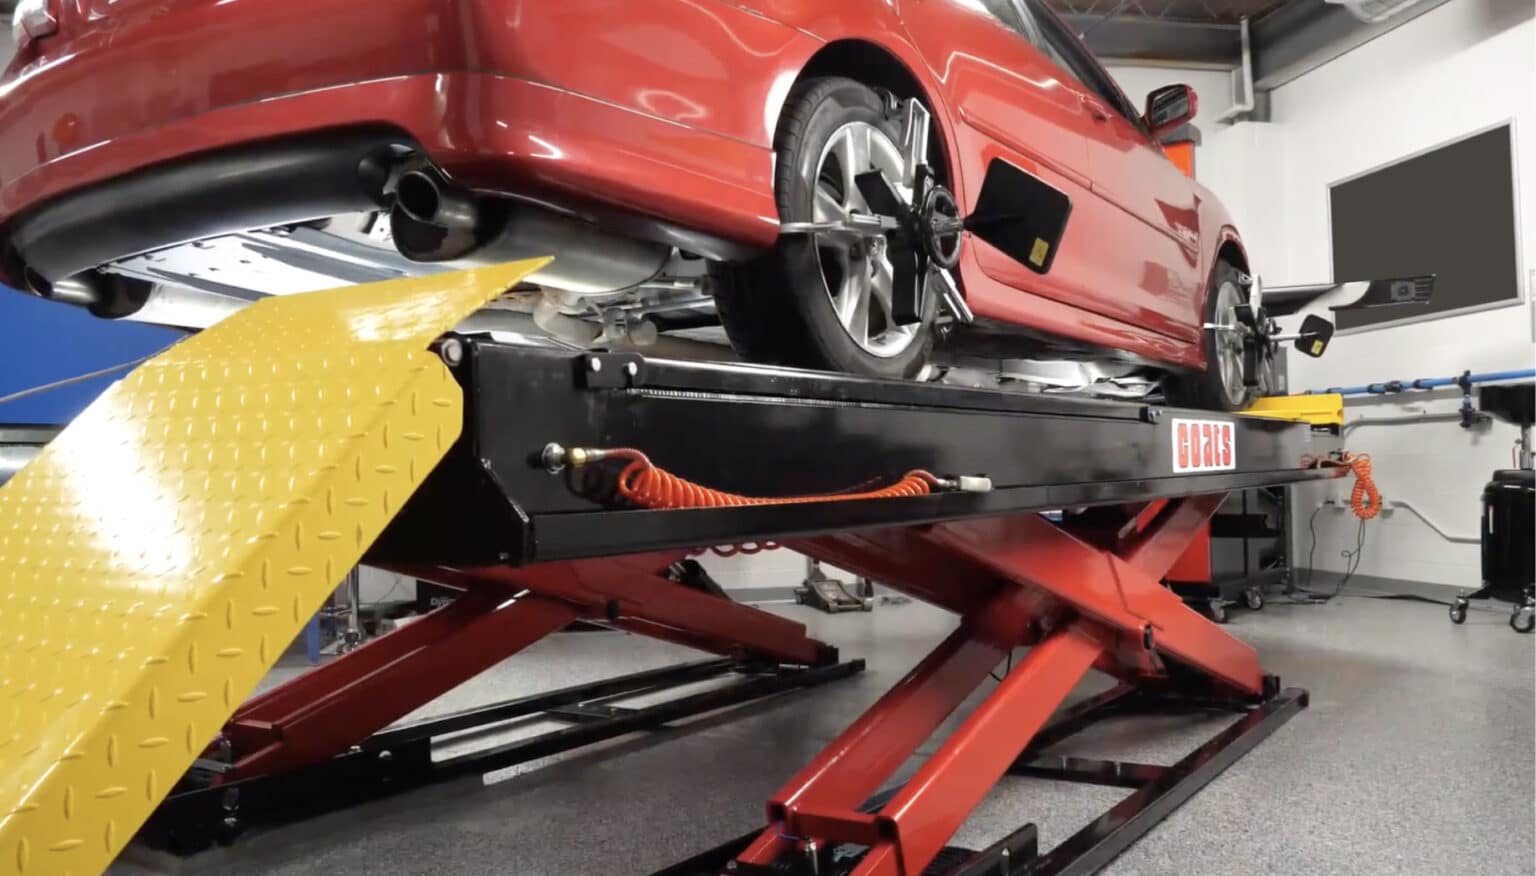 A red sedan is raised on a Coats alignment scissor lift in front of a Coats wheel aligner